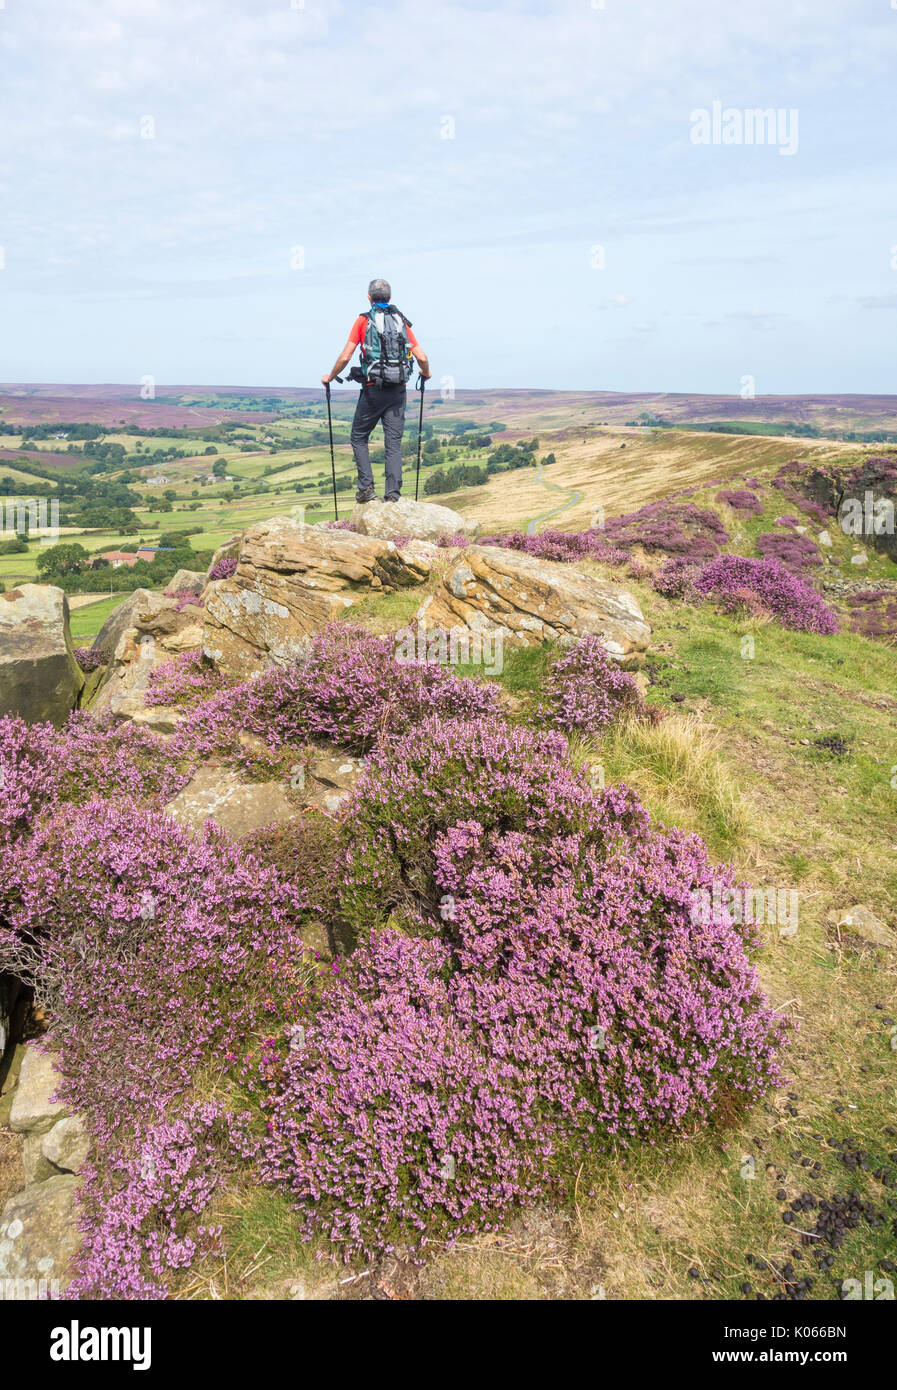 Male hiker on Castleton Rigg overlooking Westerdale with heather in flower. North York Moors National park England, UK. Stock Photo